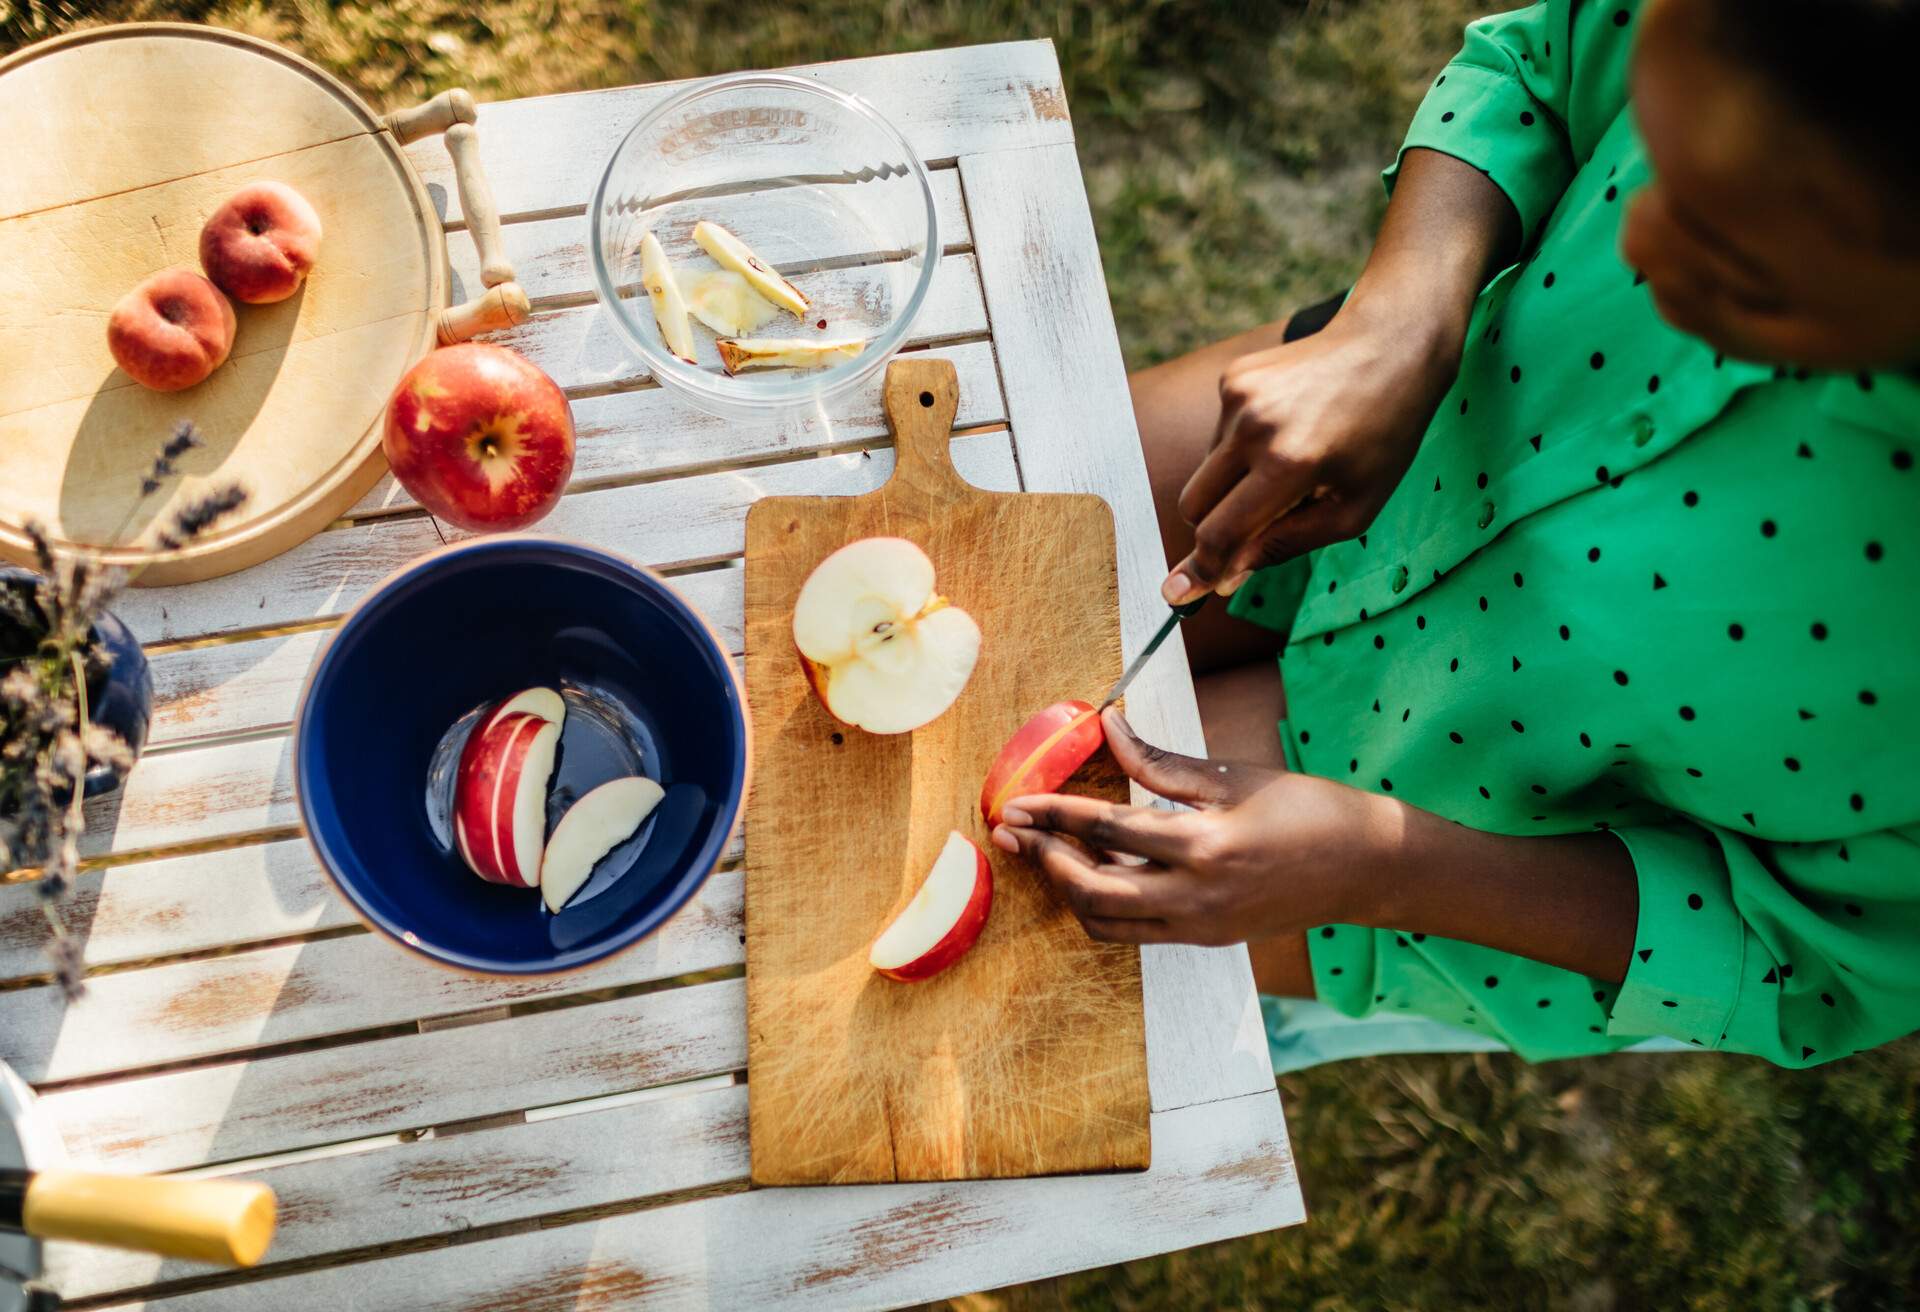 A woman cutting fruit at a wooden table outdoors preparing a snack for her family in the afternoon sun.